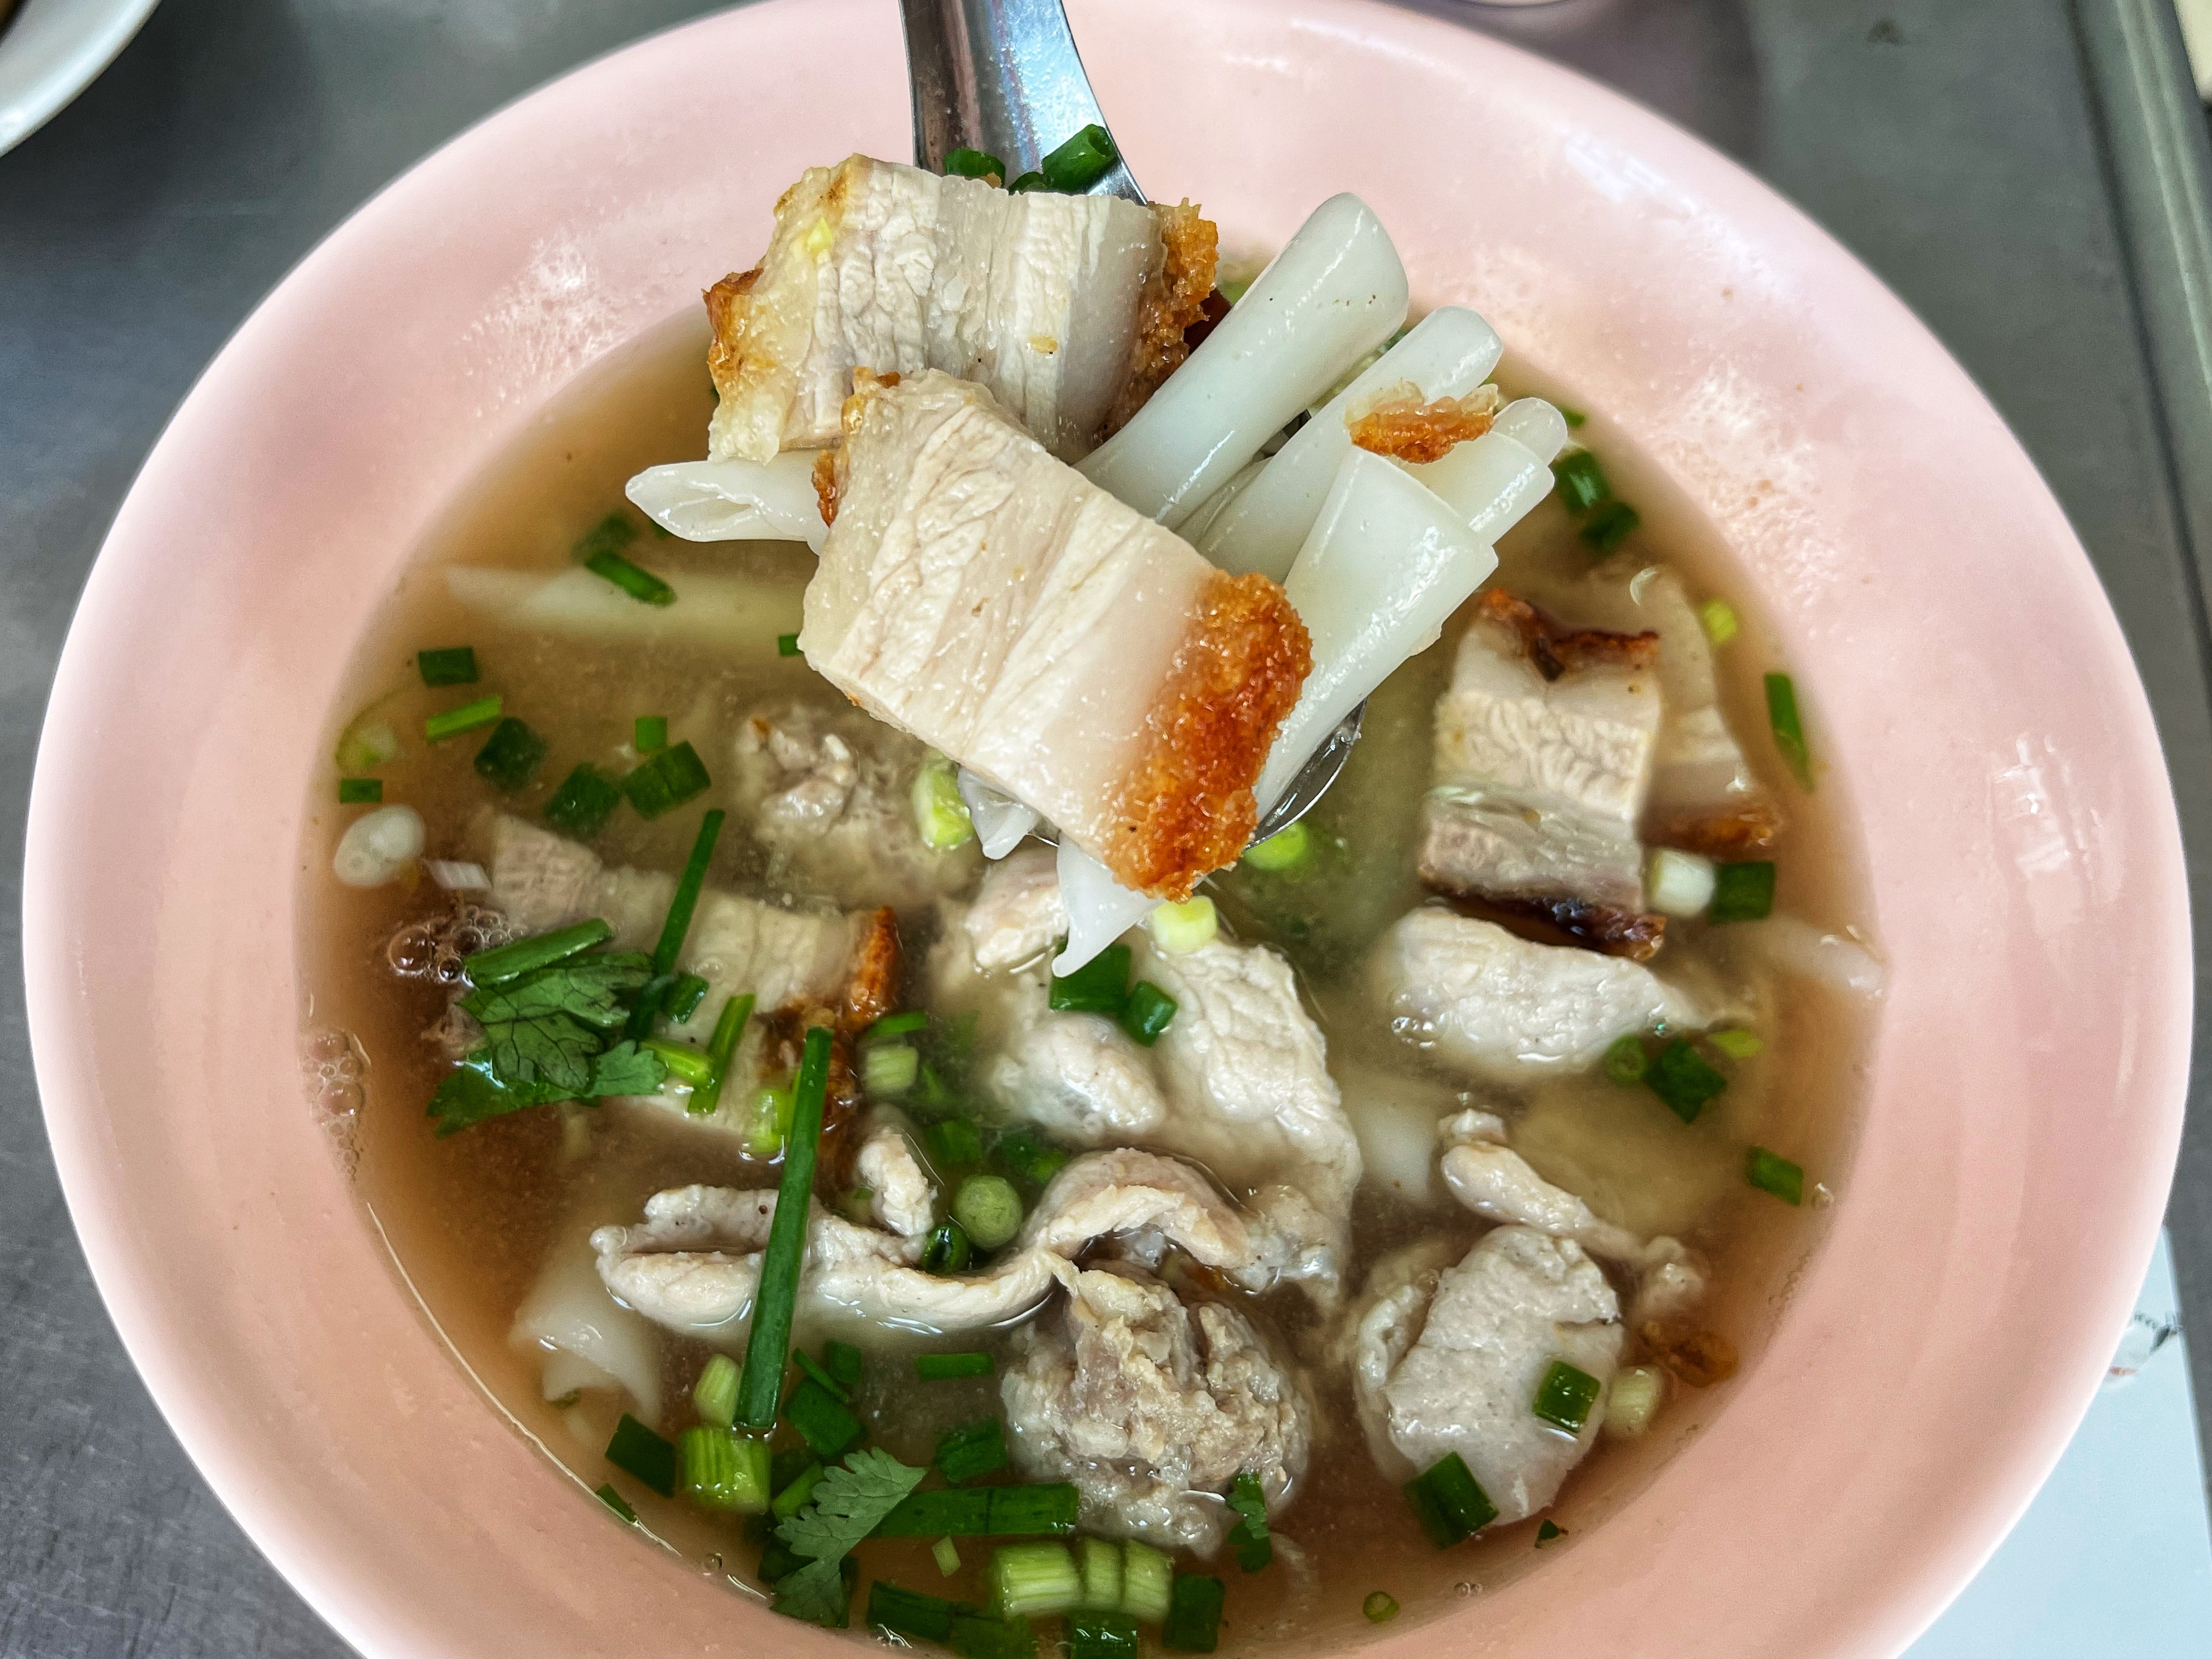 kuay jab, or peppery rolled noodle pork soup